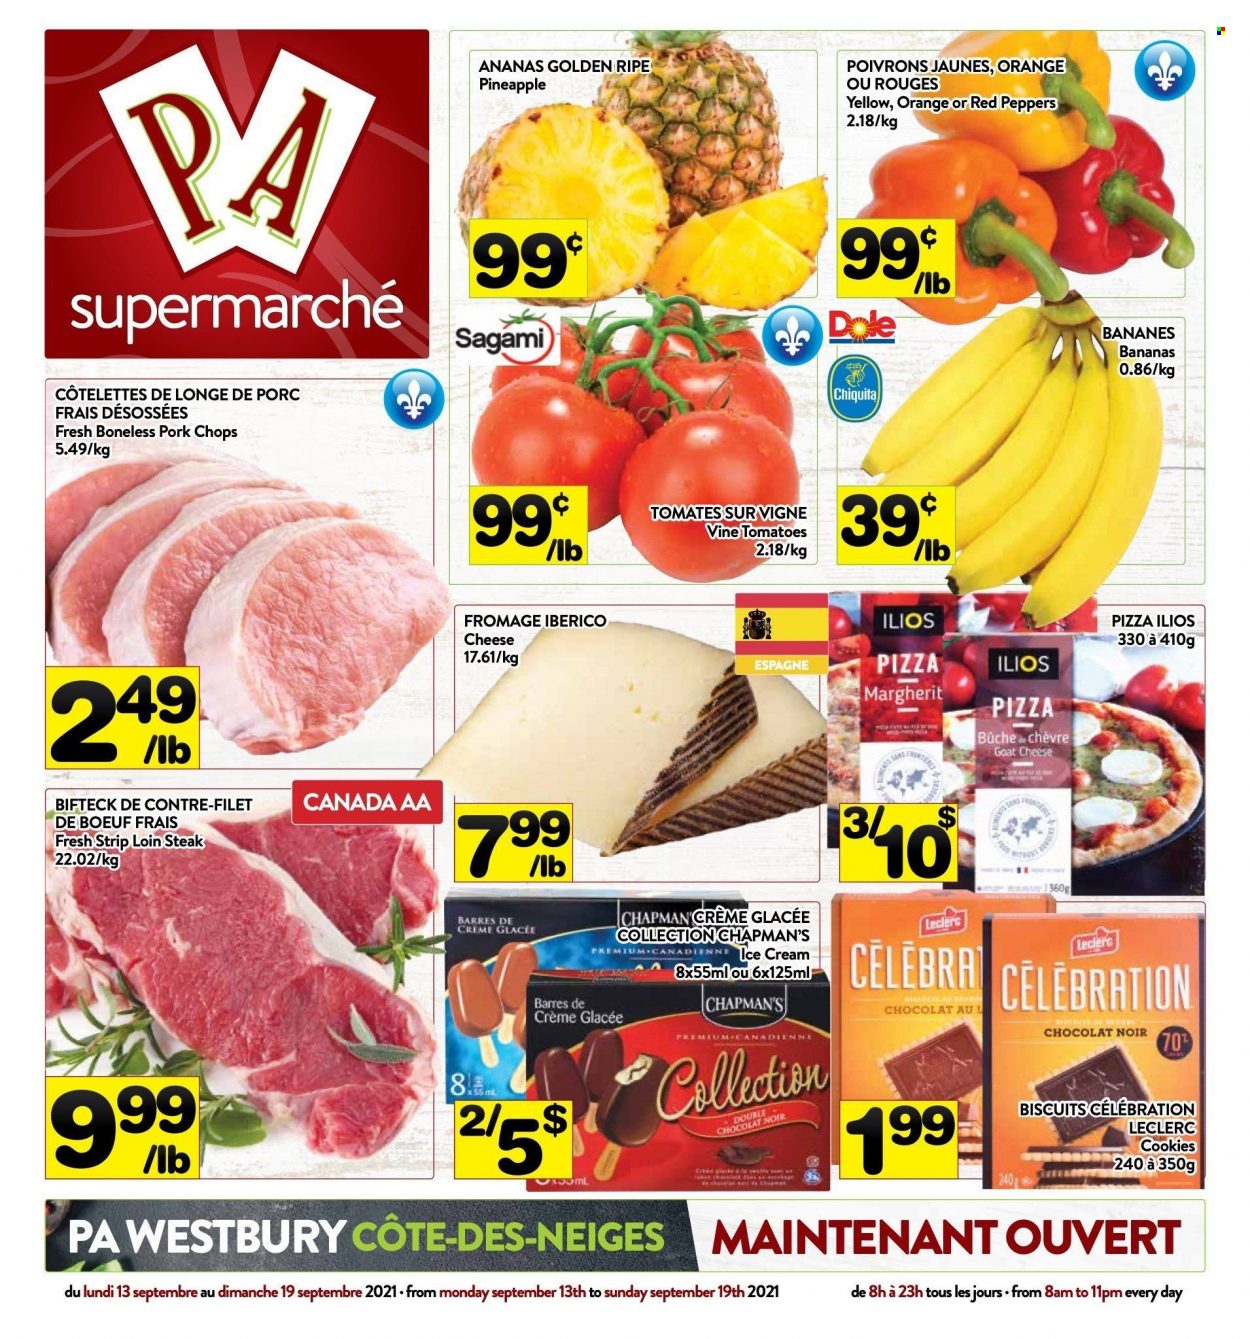 thumbnail - PA Supermarché Flyer - September 13, 2021 - September 19, 2021 - Sales products - Dole, peppers, red peppers, bananas, pineapple, pizza, cookies, Celebration, biscuit, pork chops, pork meat, steak, oranges. Page 1.